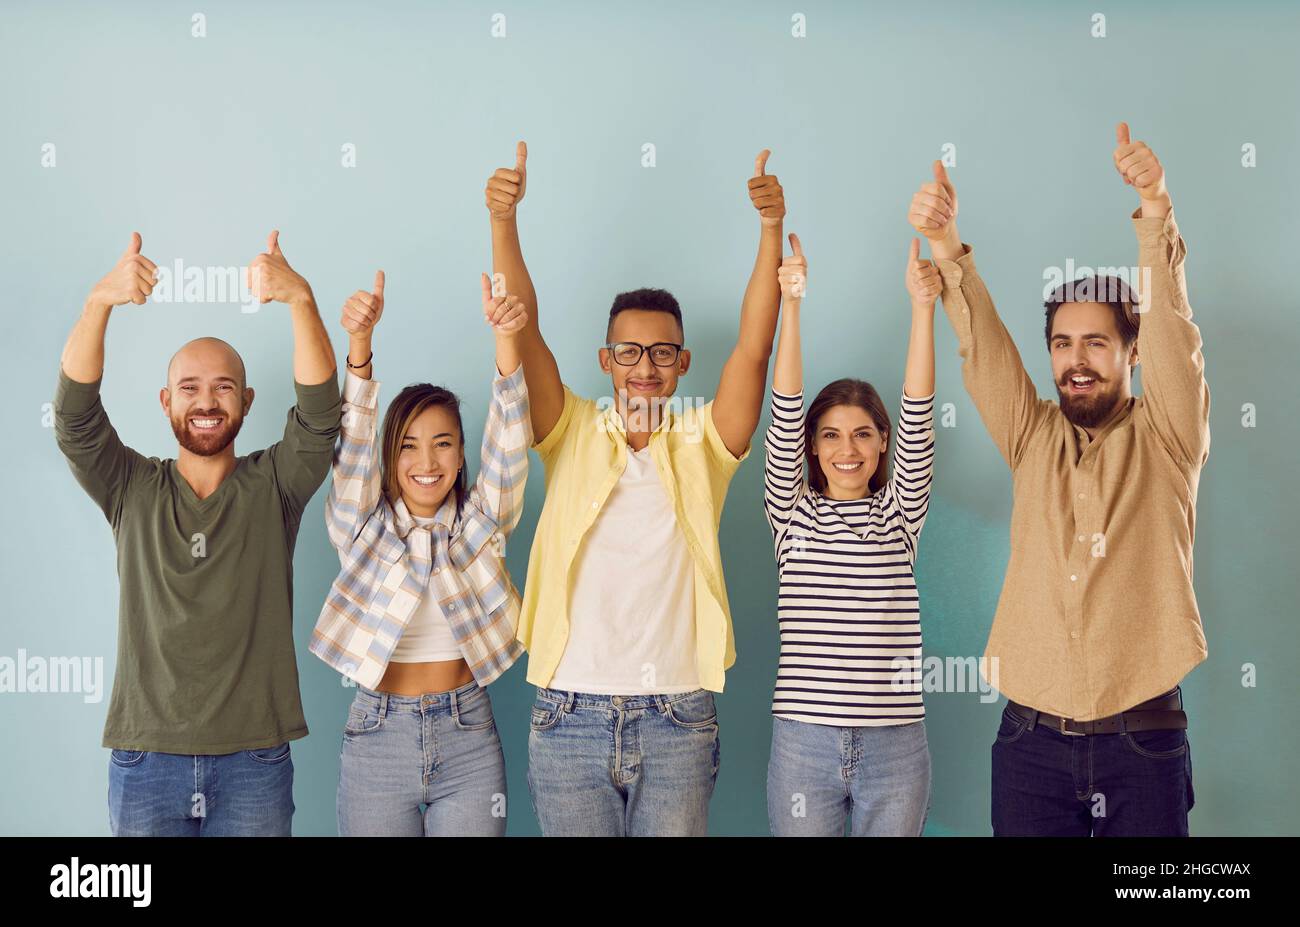 Young people make happy gesture by raising their hands with thumbs up demonstrating success. Stock Photo